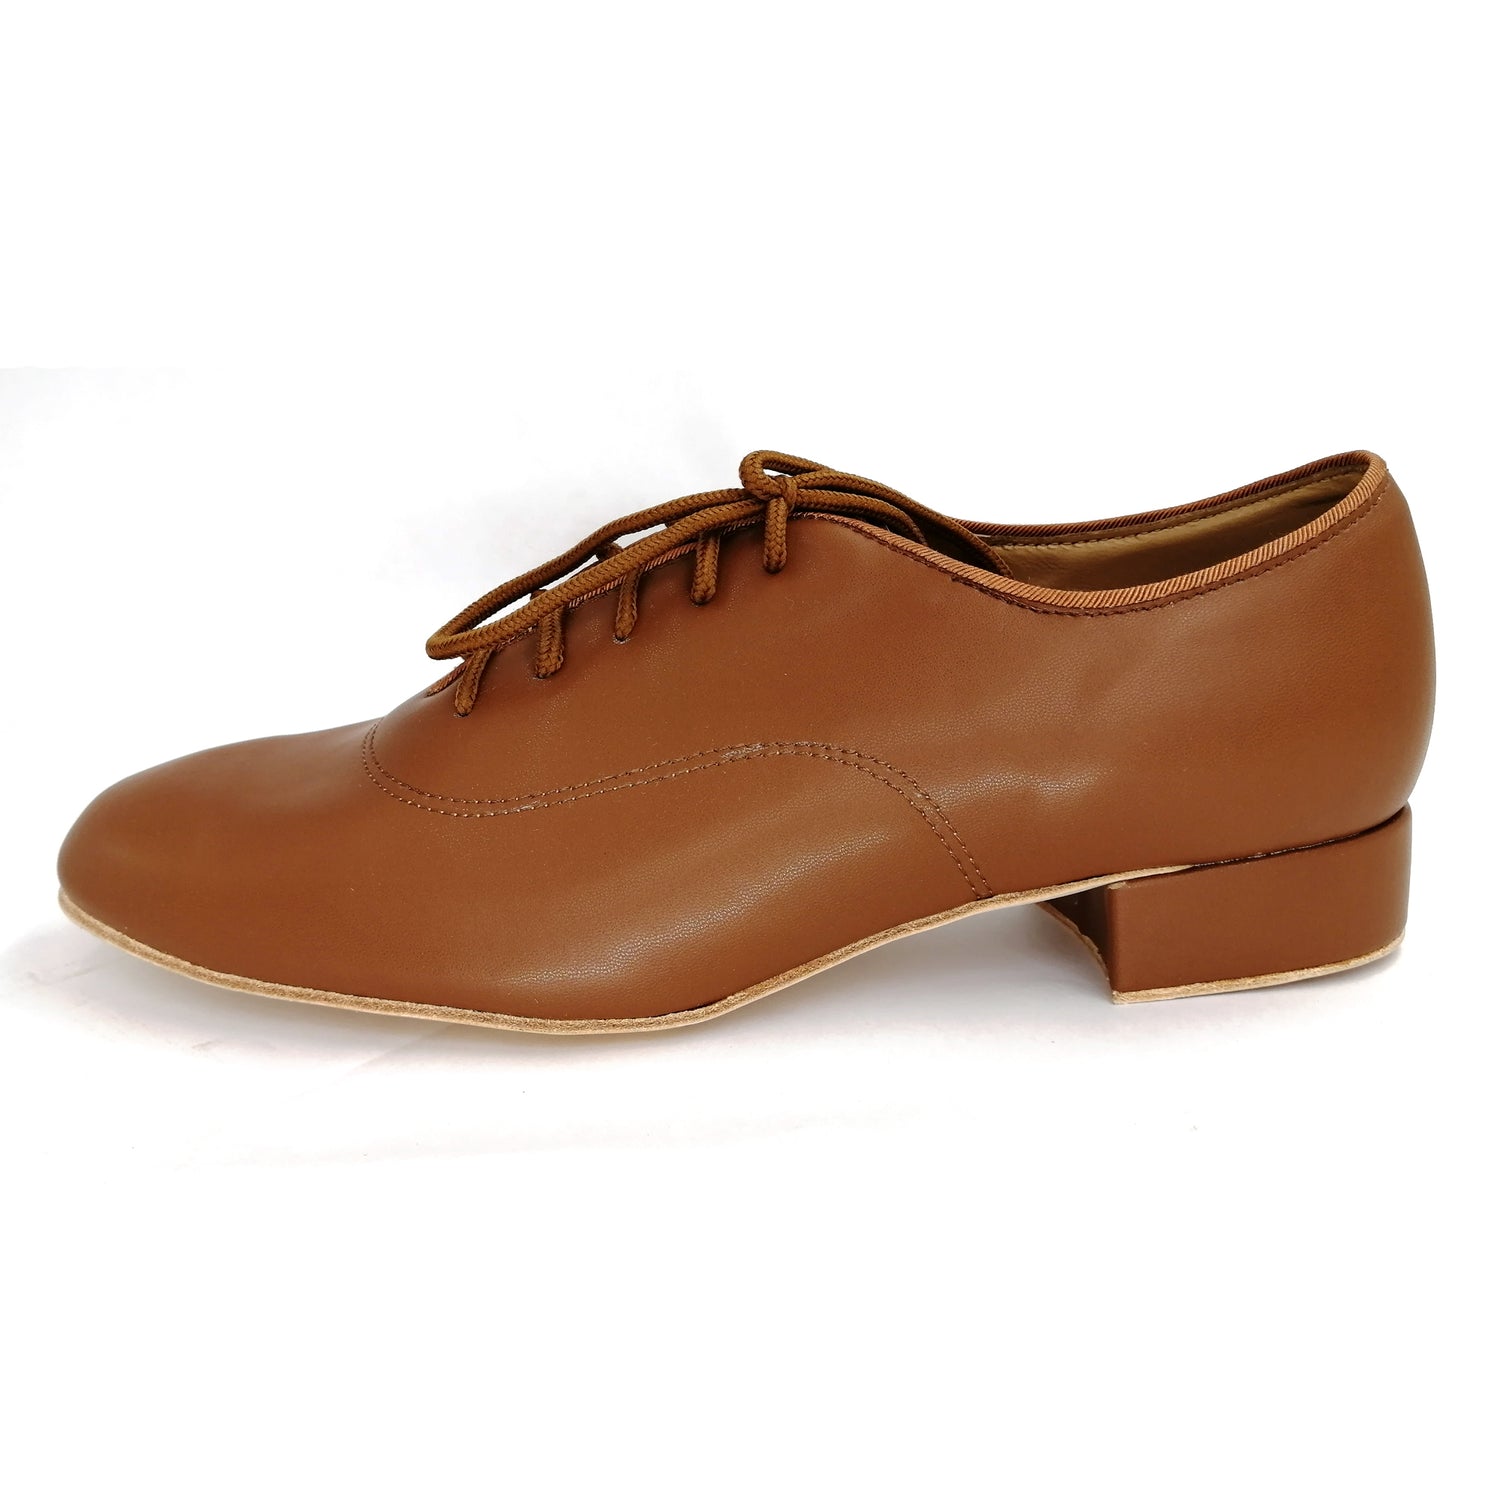 Pro Dancer Men's Tango Shoes with 1 inch Leather Heel and Lace-up in Brown6